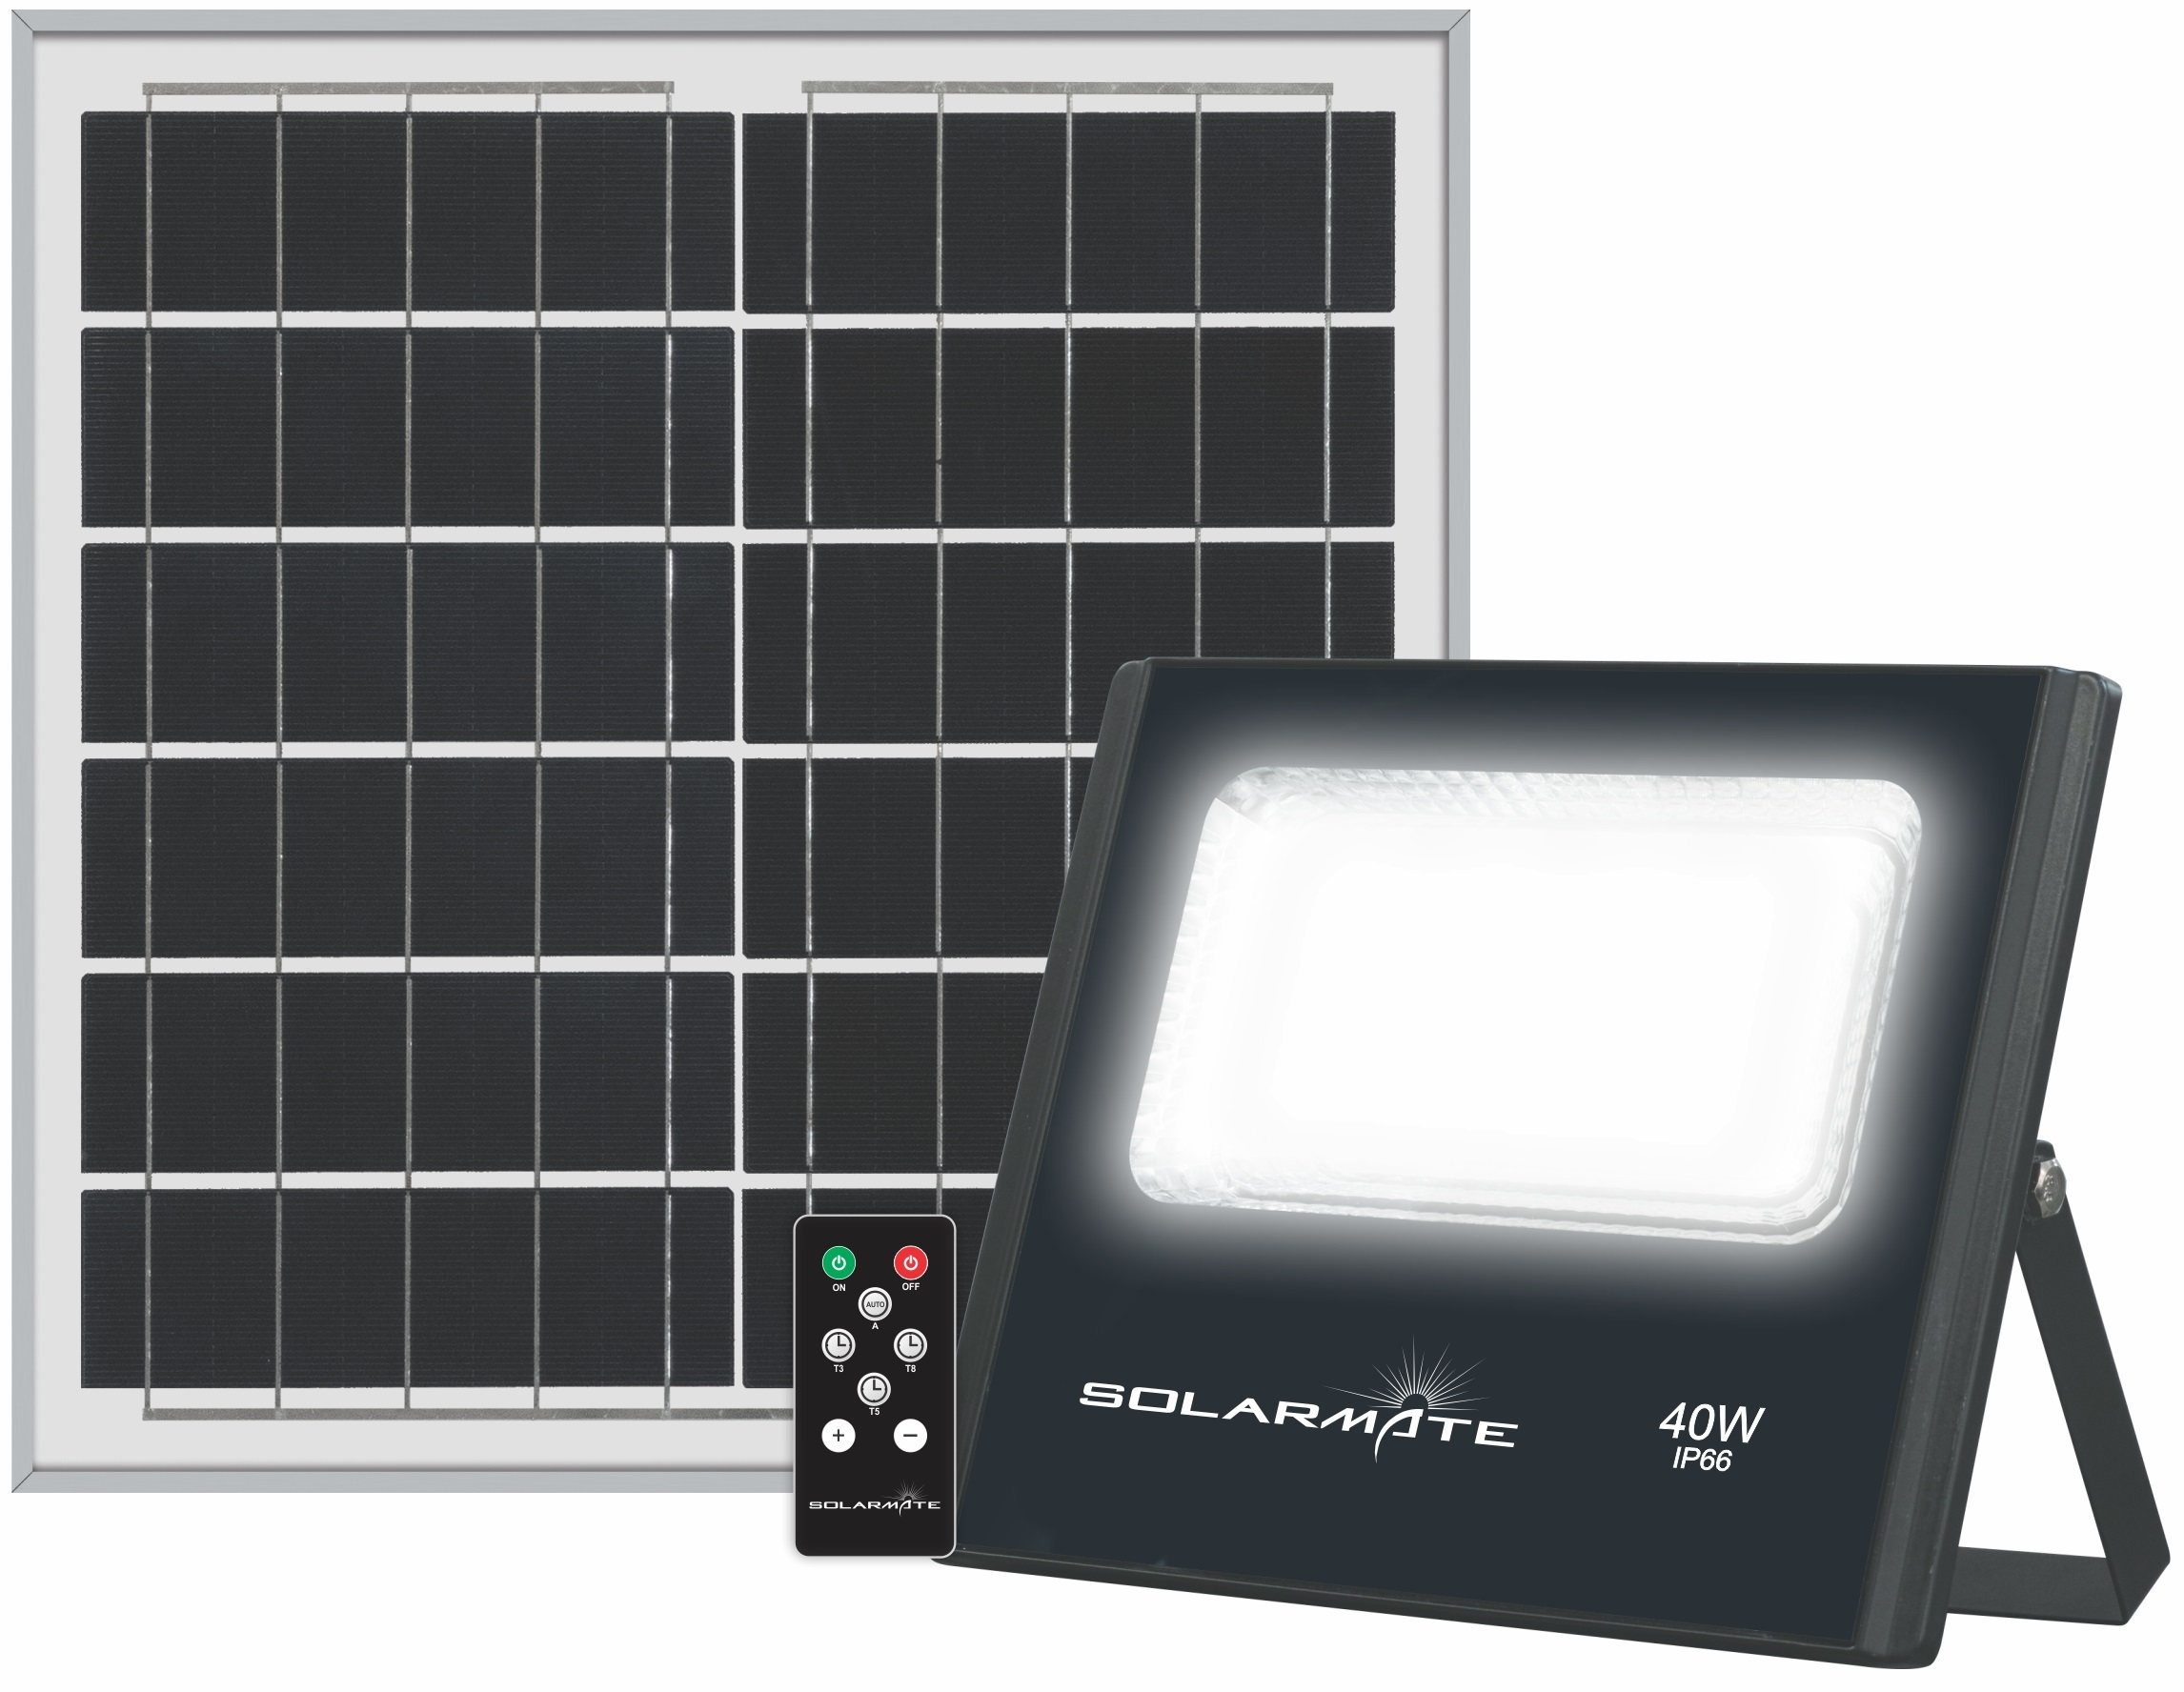 40W LED Security flood light. Remote Control, Solar Powered. Polycrystalline solar panel, 5000mAh Li-Ion battery. Last up to 8 hours. Energy saving, cool white and waterproof IP66. Permanently on function.